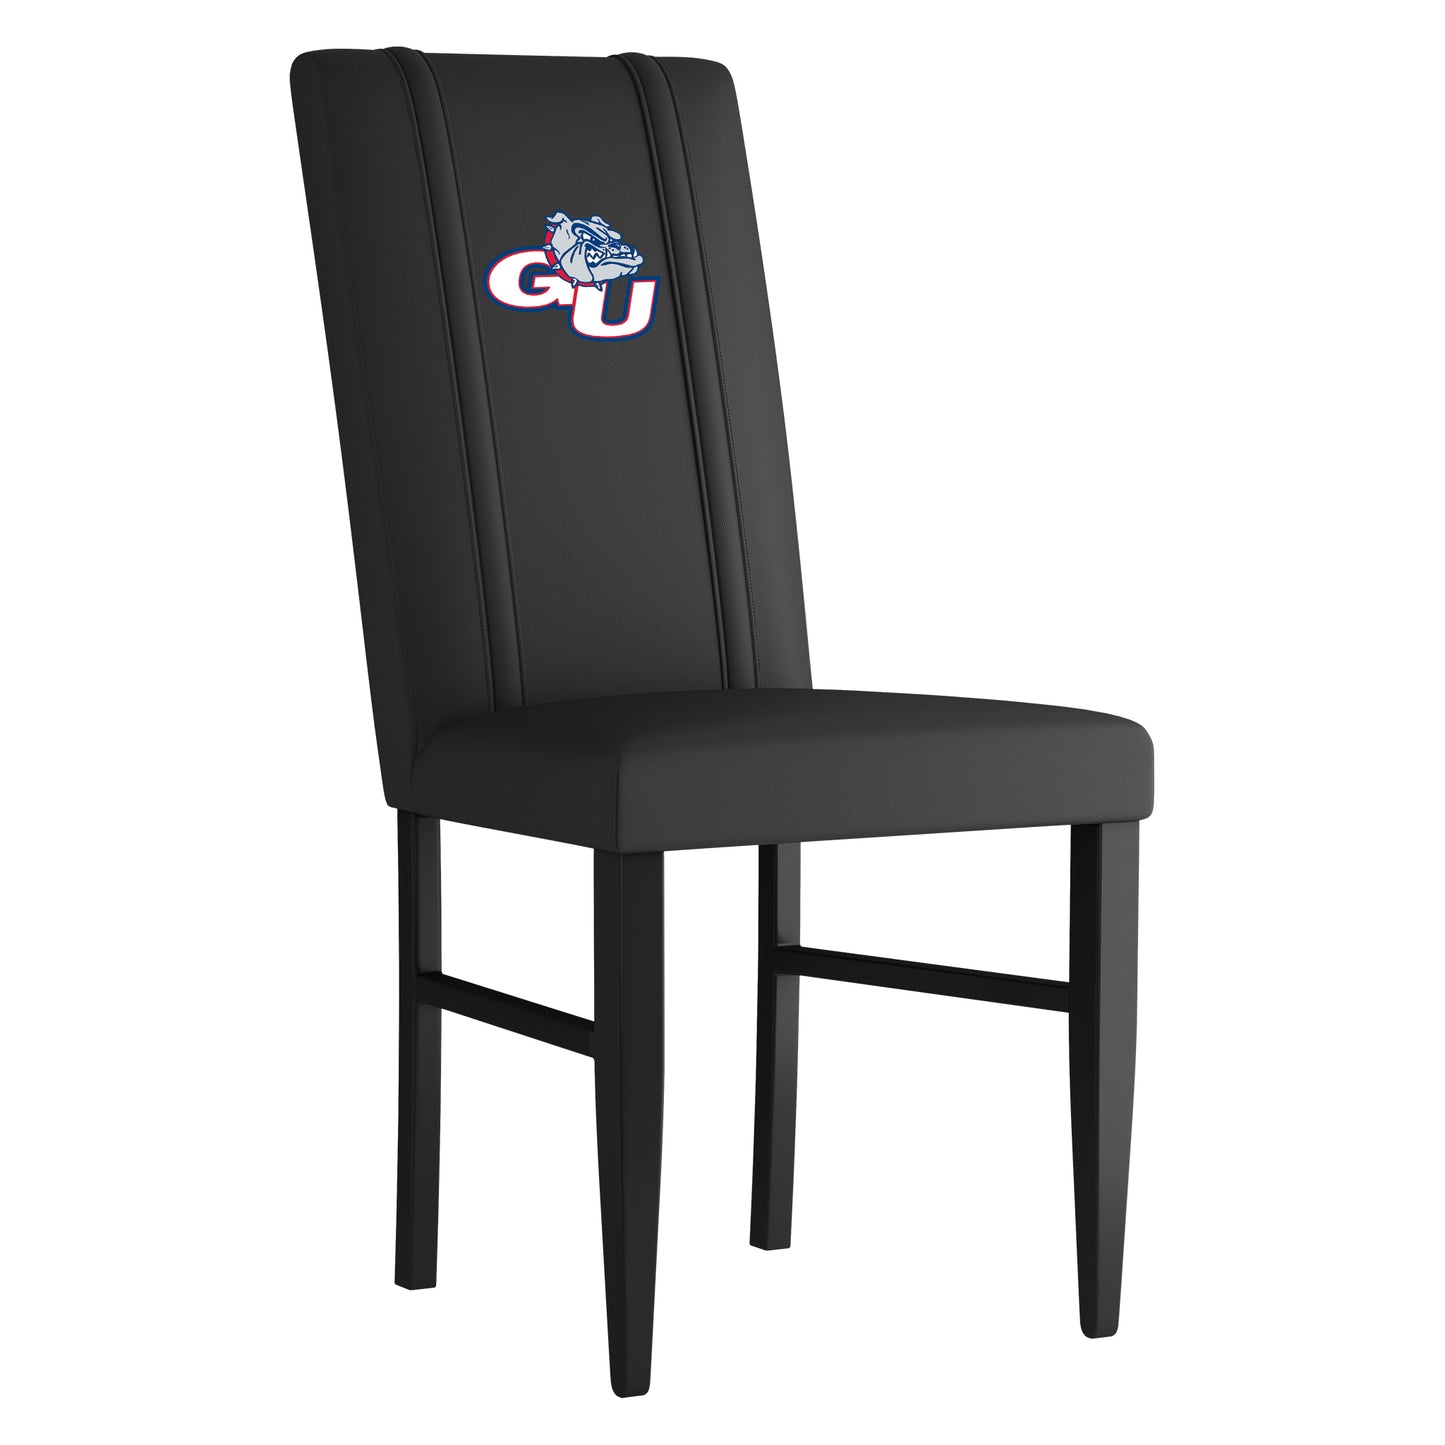 Side Chair 2000 with Gonzaga Bulldogs Logo Set of 2